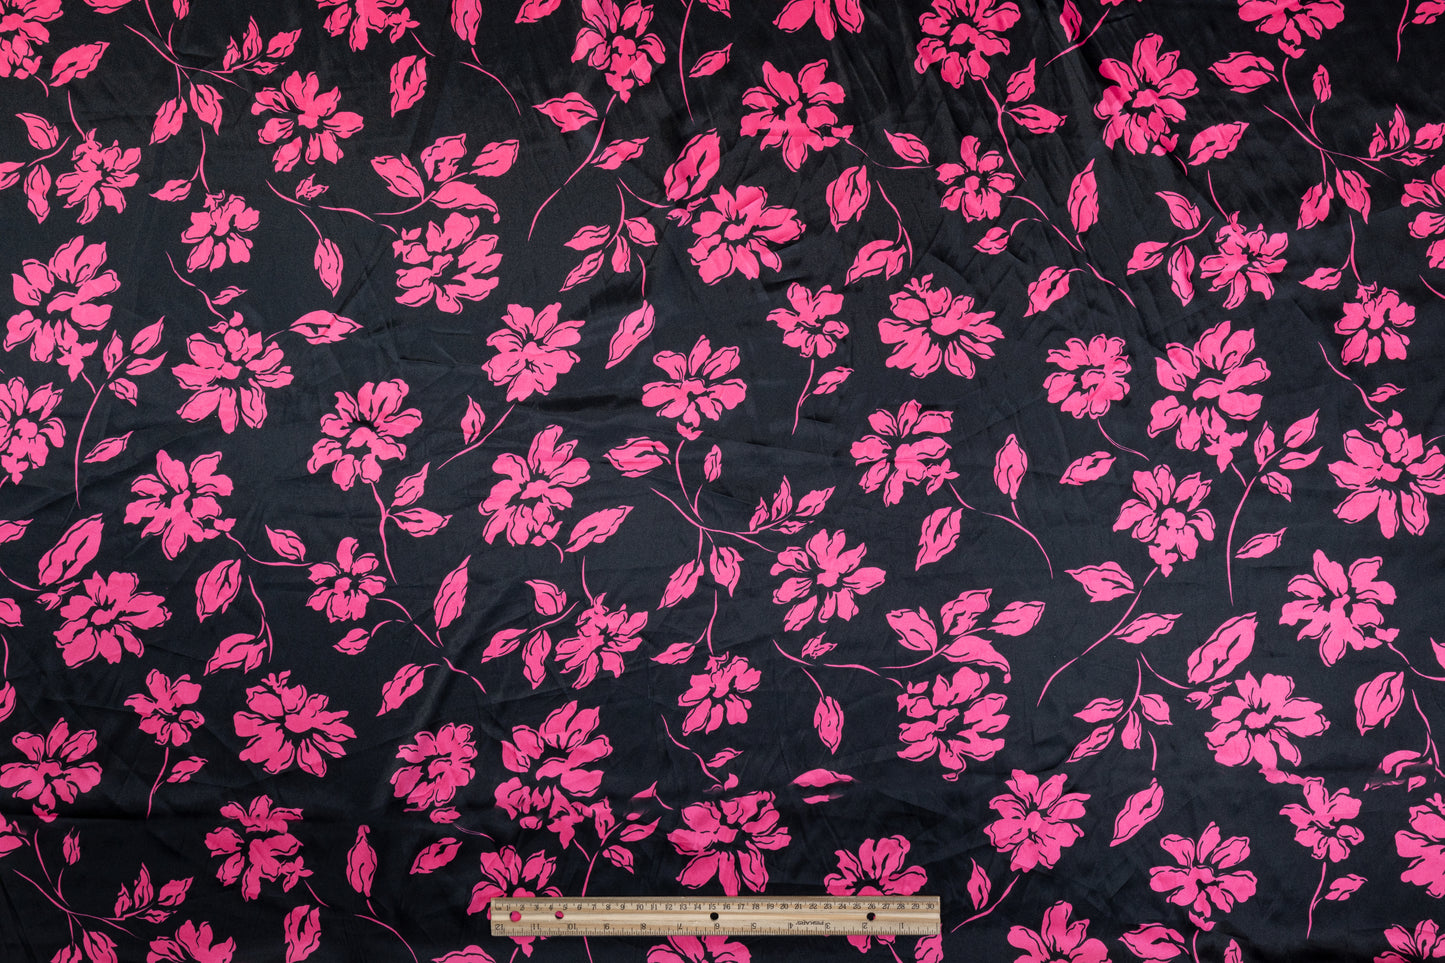 Floral Polyester Charmeuse - Pink and Black